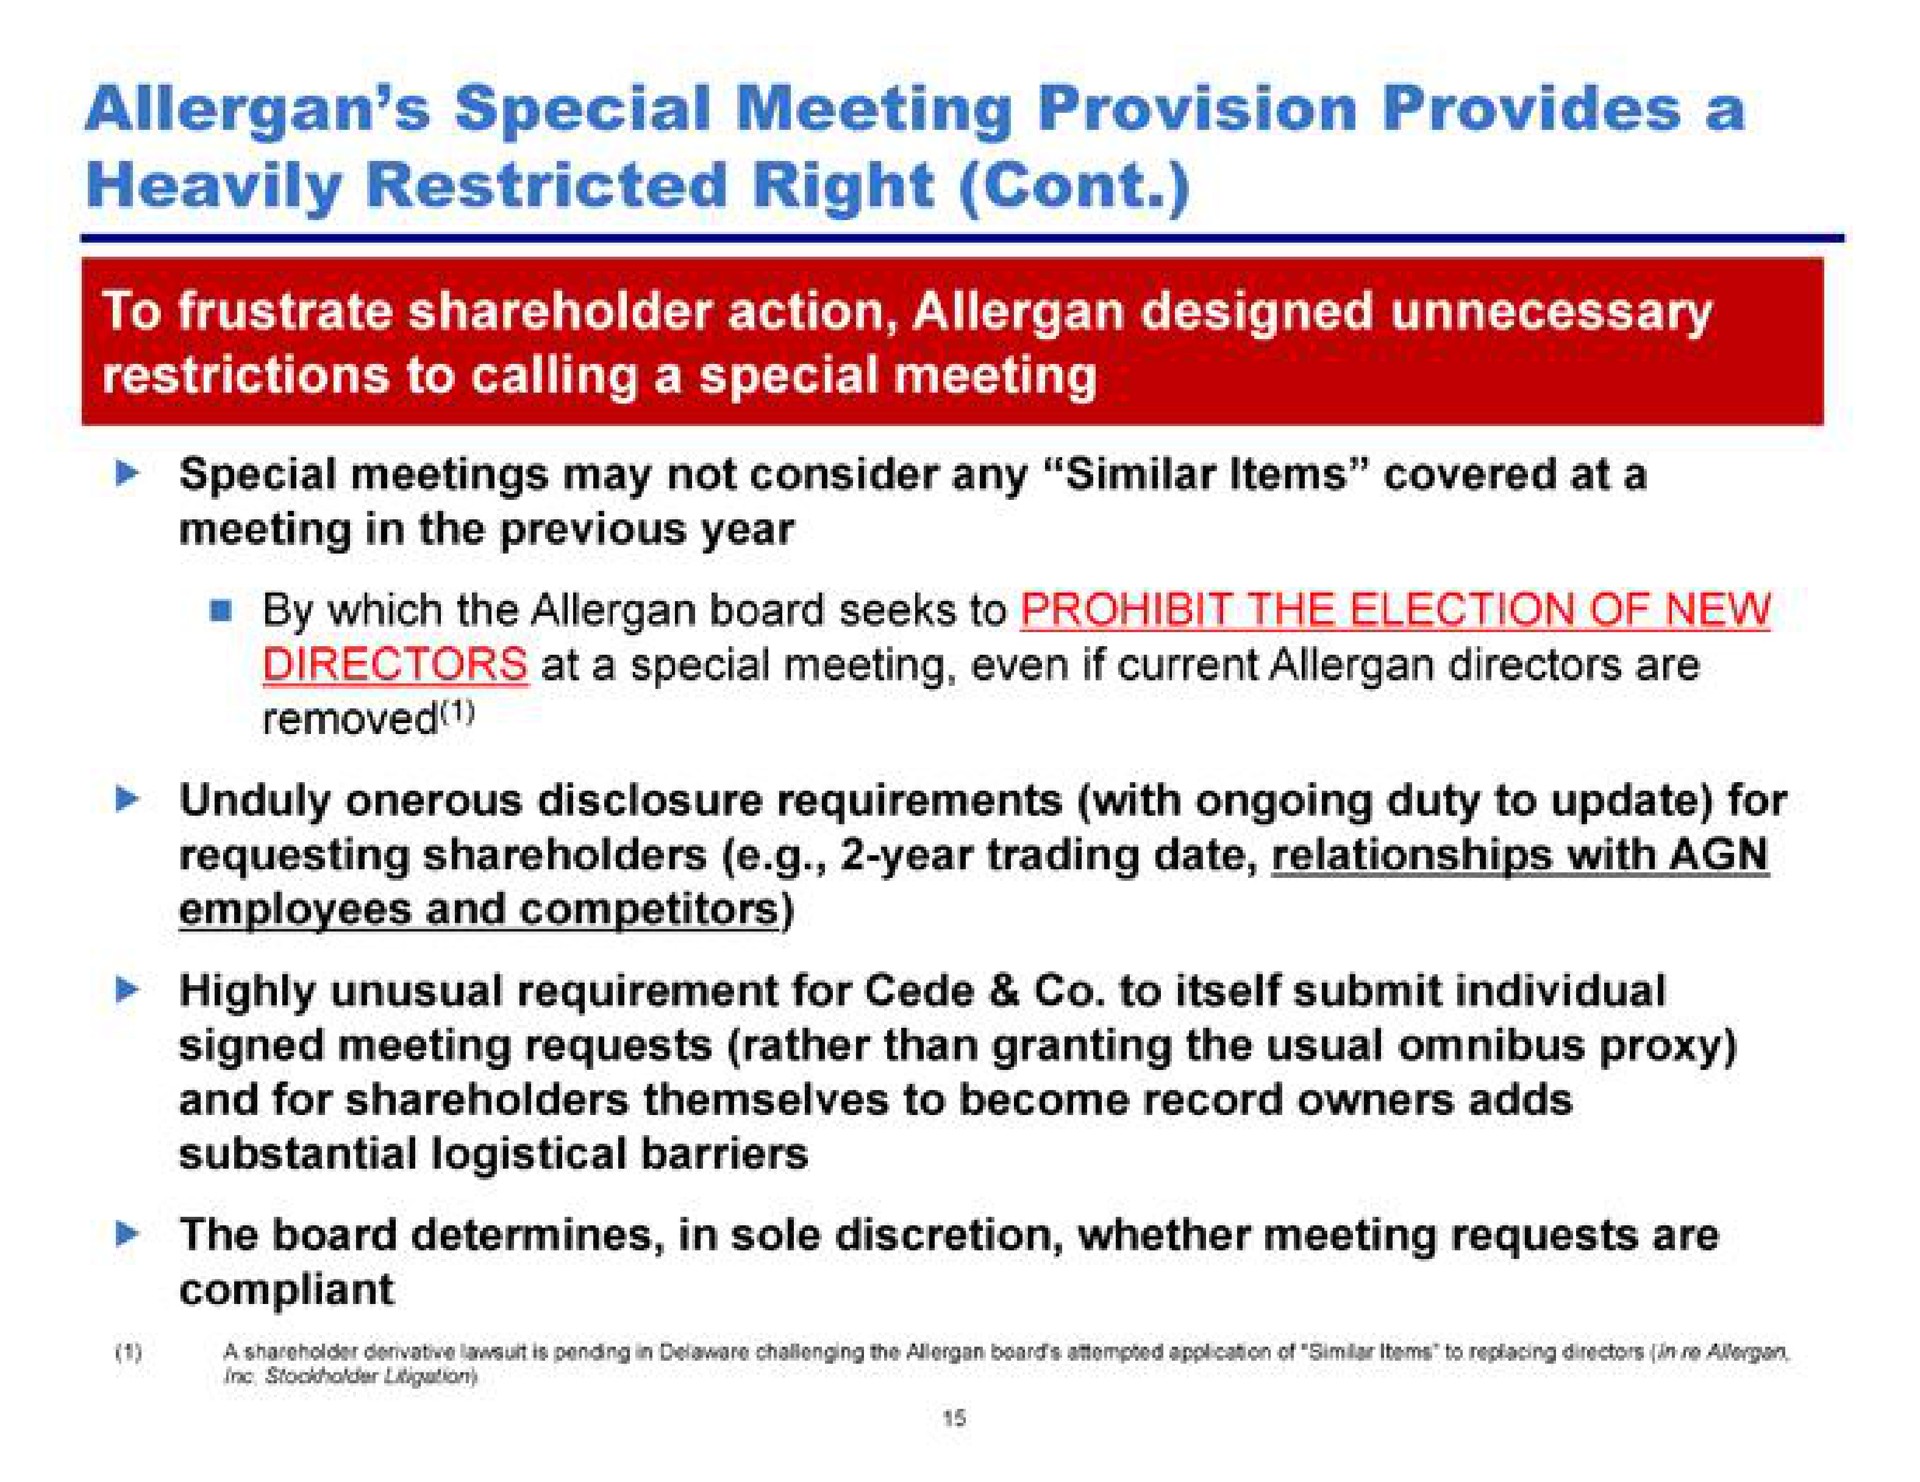 special meeting provision provides a heavily restricted right | Pershing Square